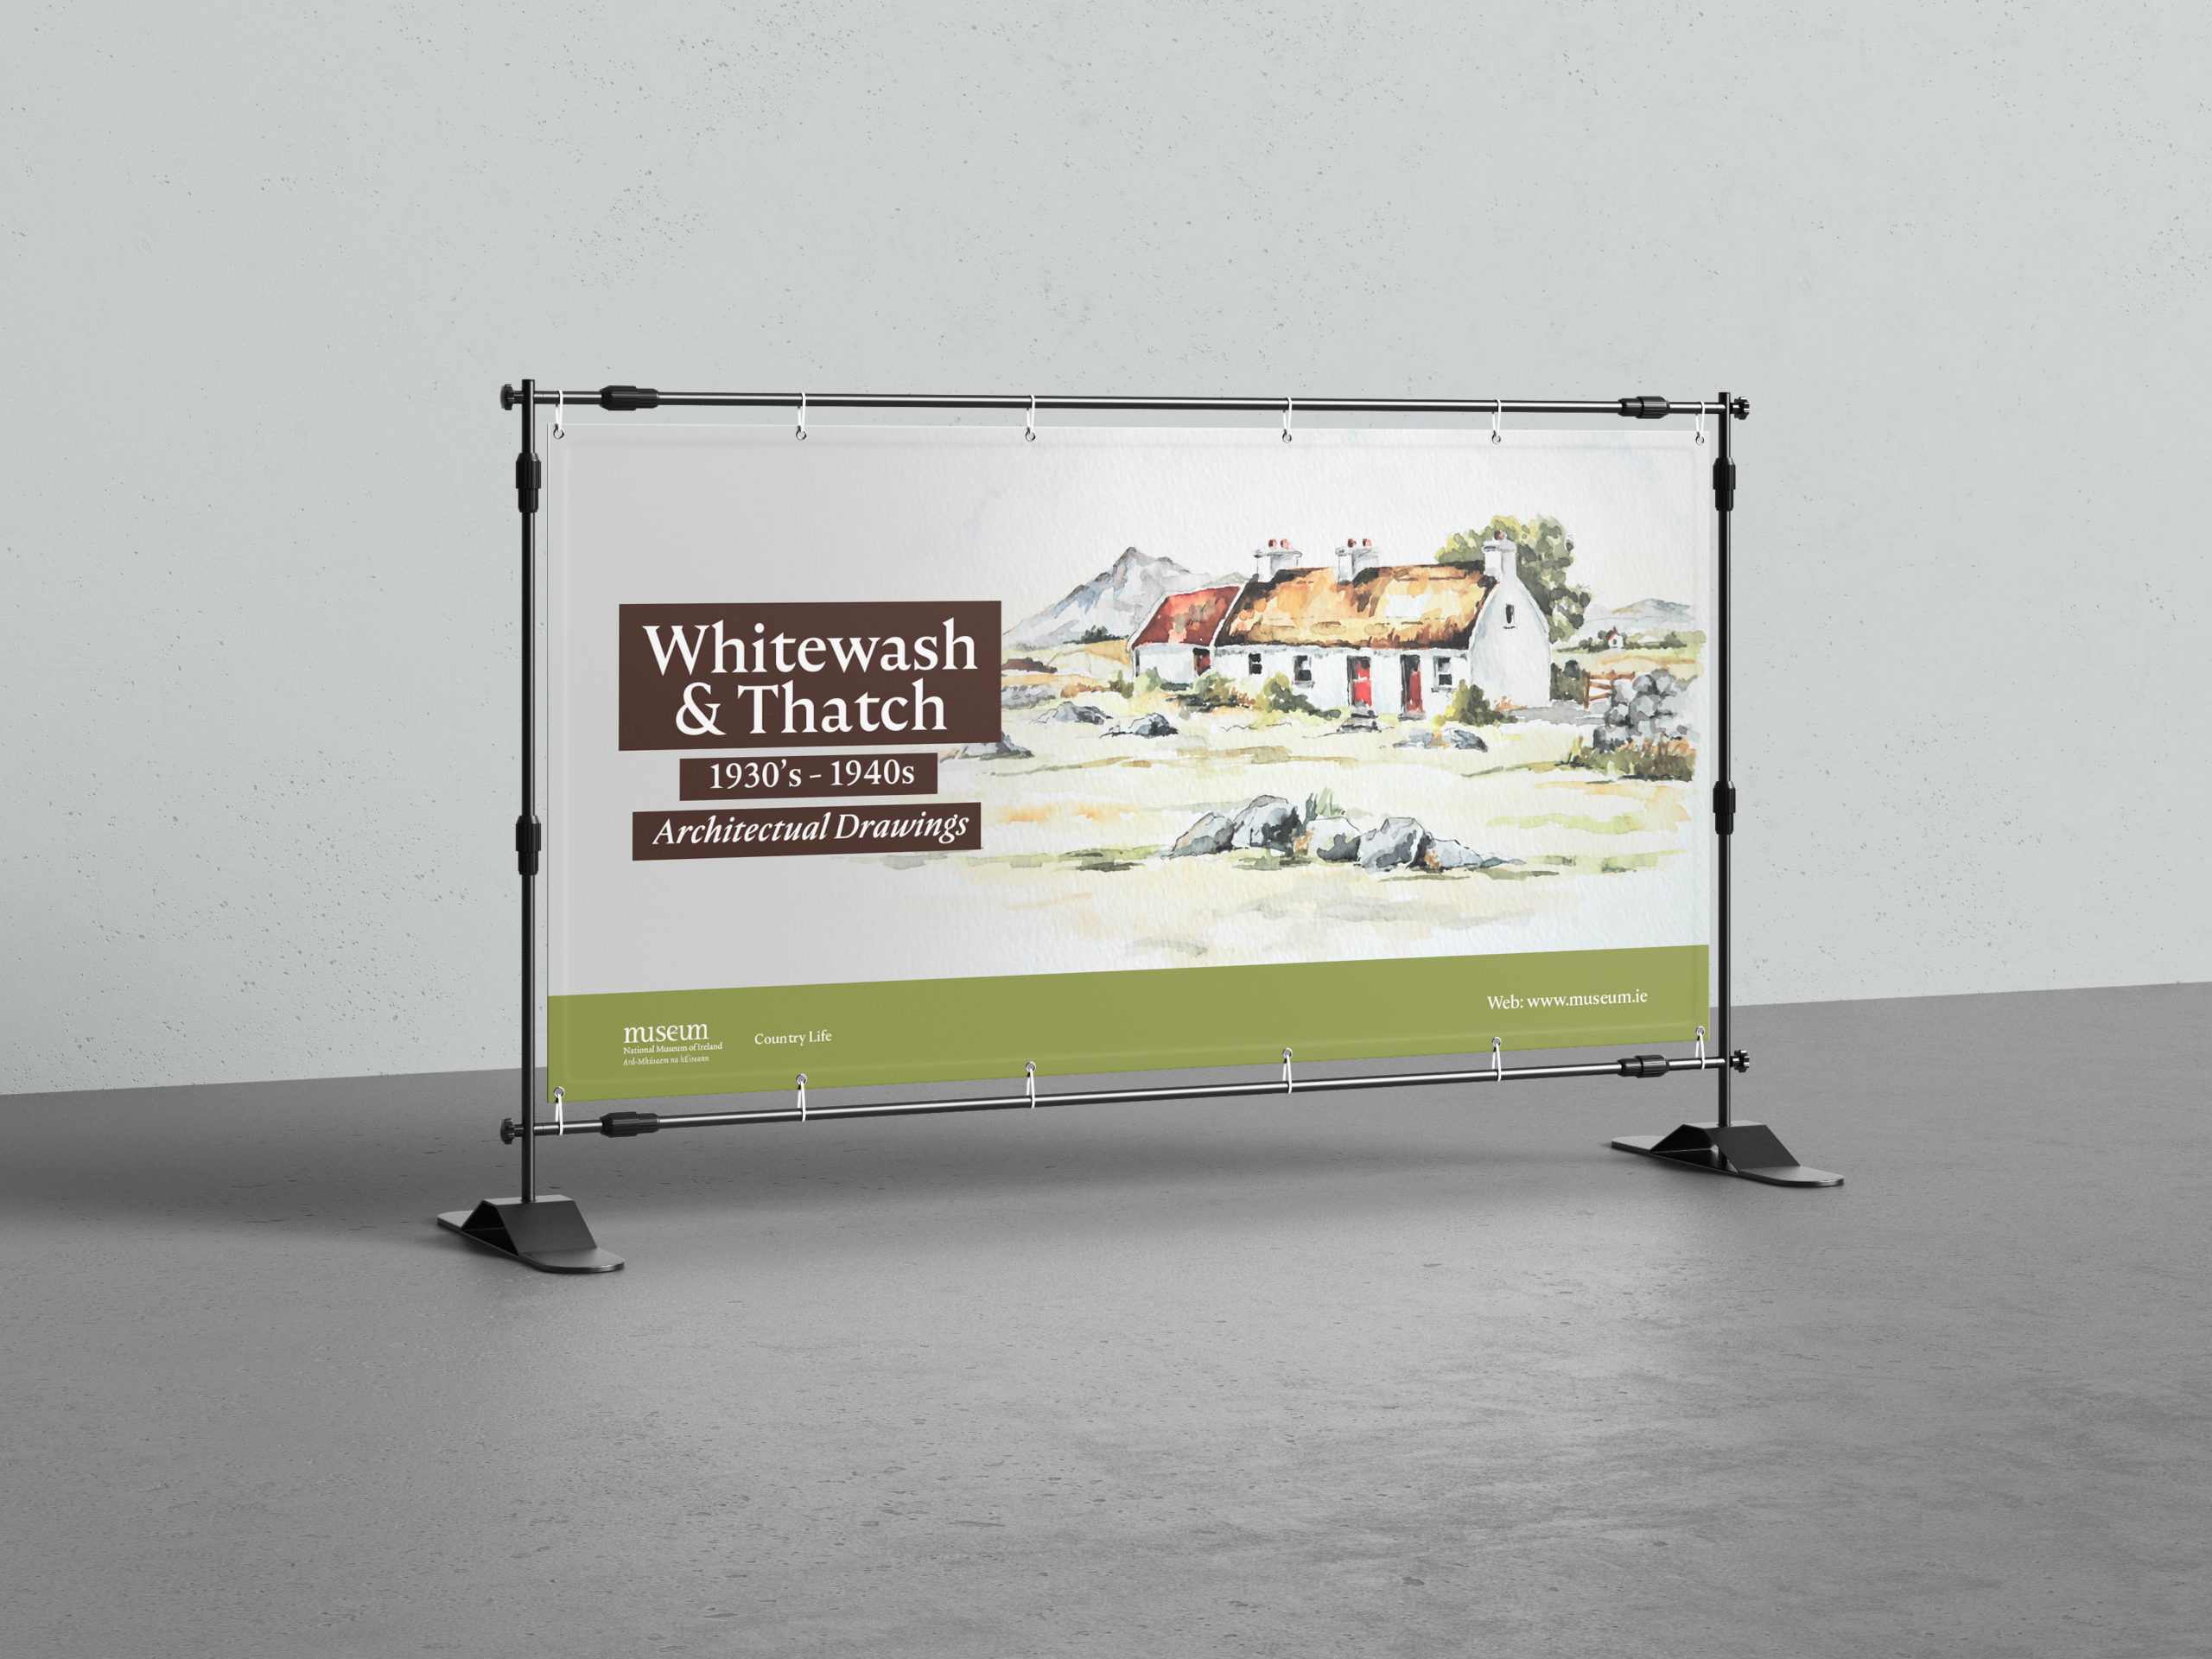 whitewash-&-thatch-double-sided-banner